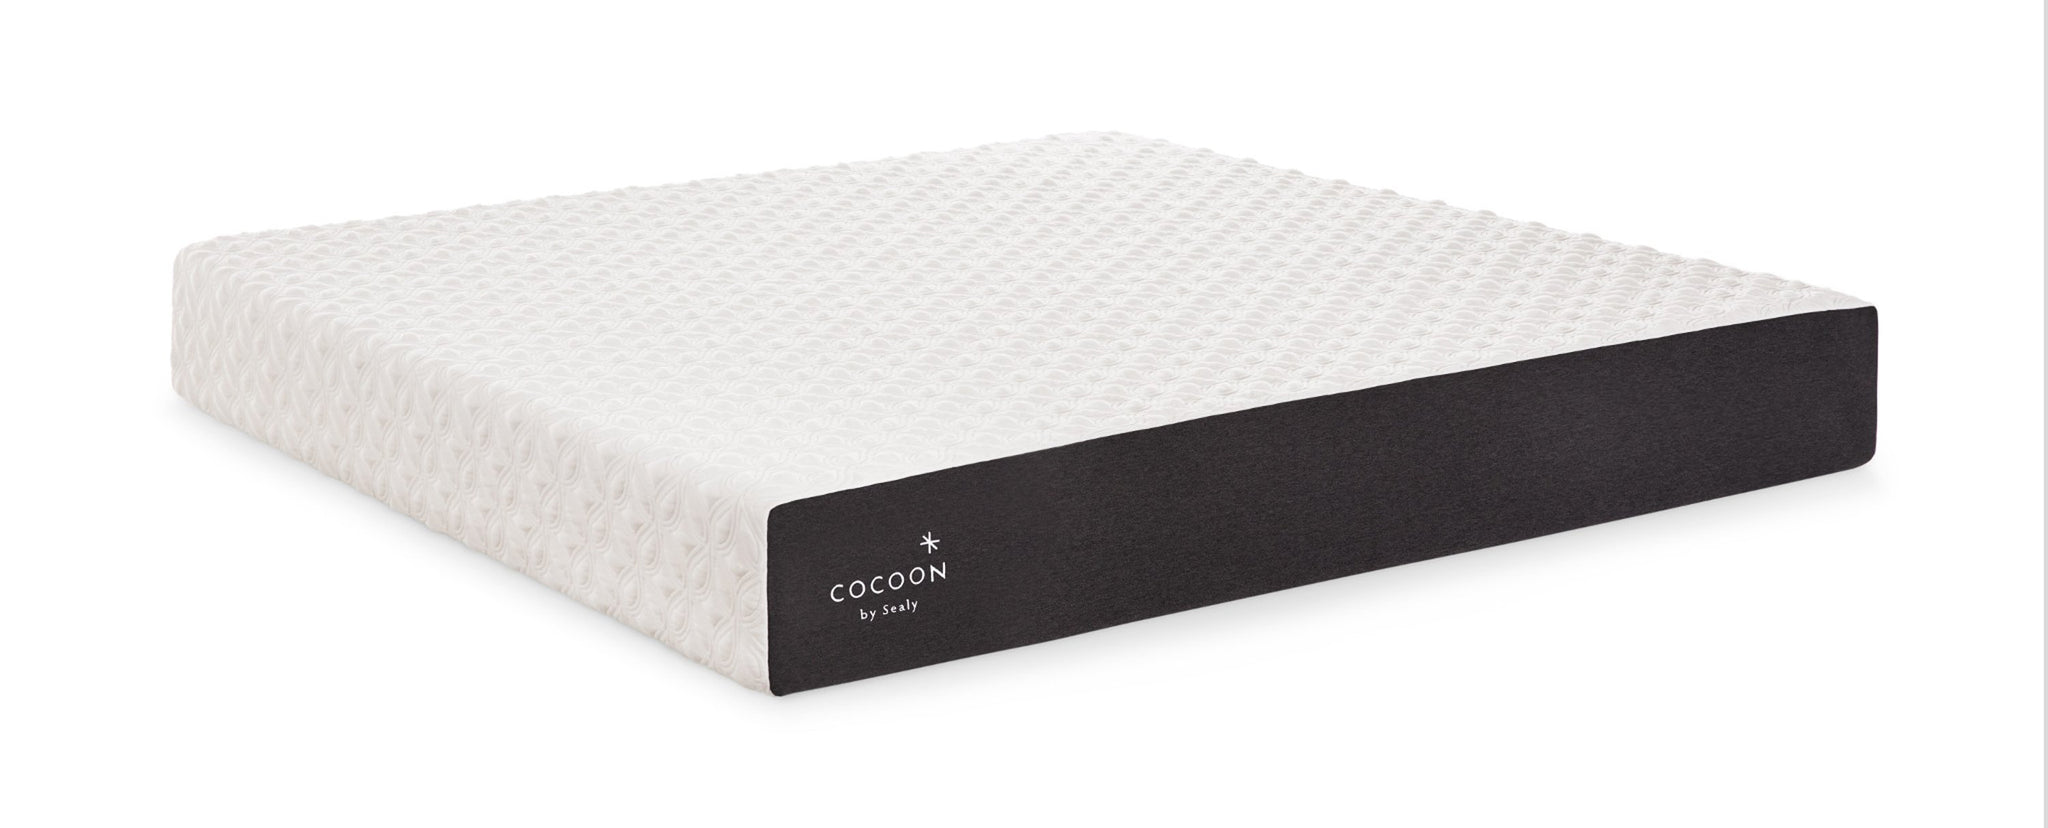 Picture of Cocoon Mattress by Sealy - King - 10" Thickness